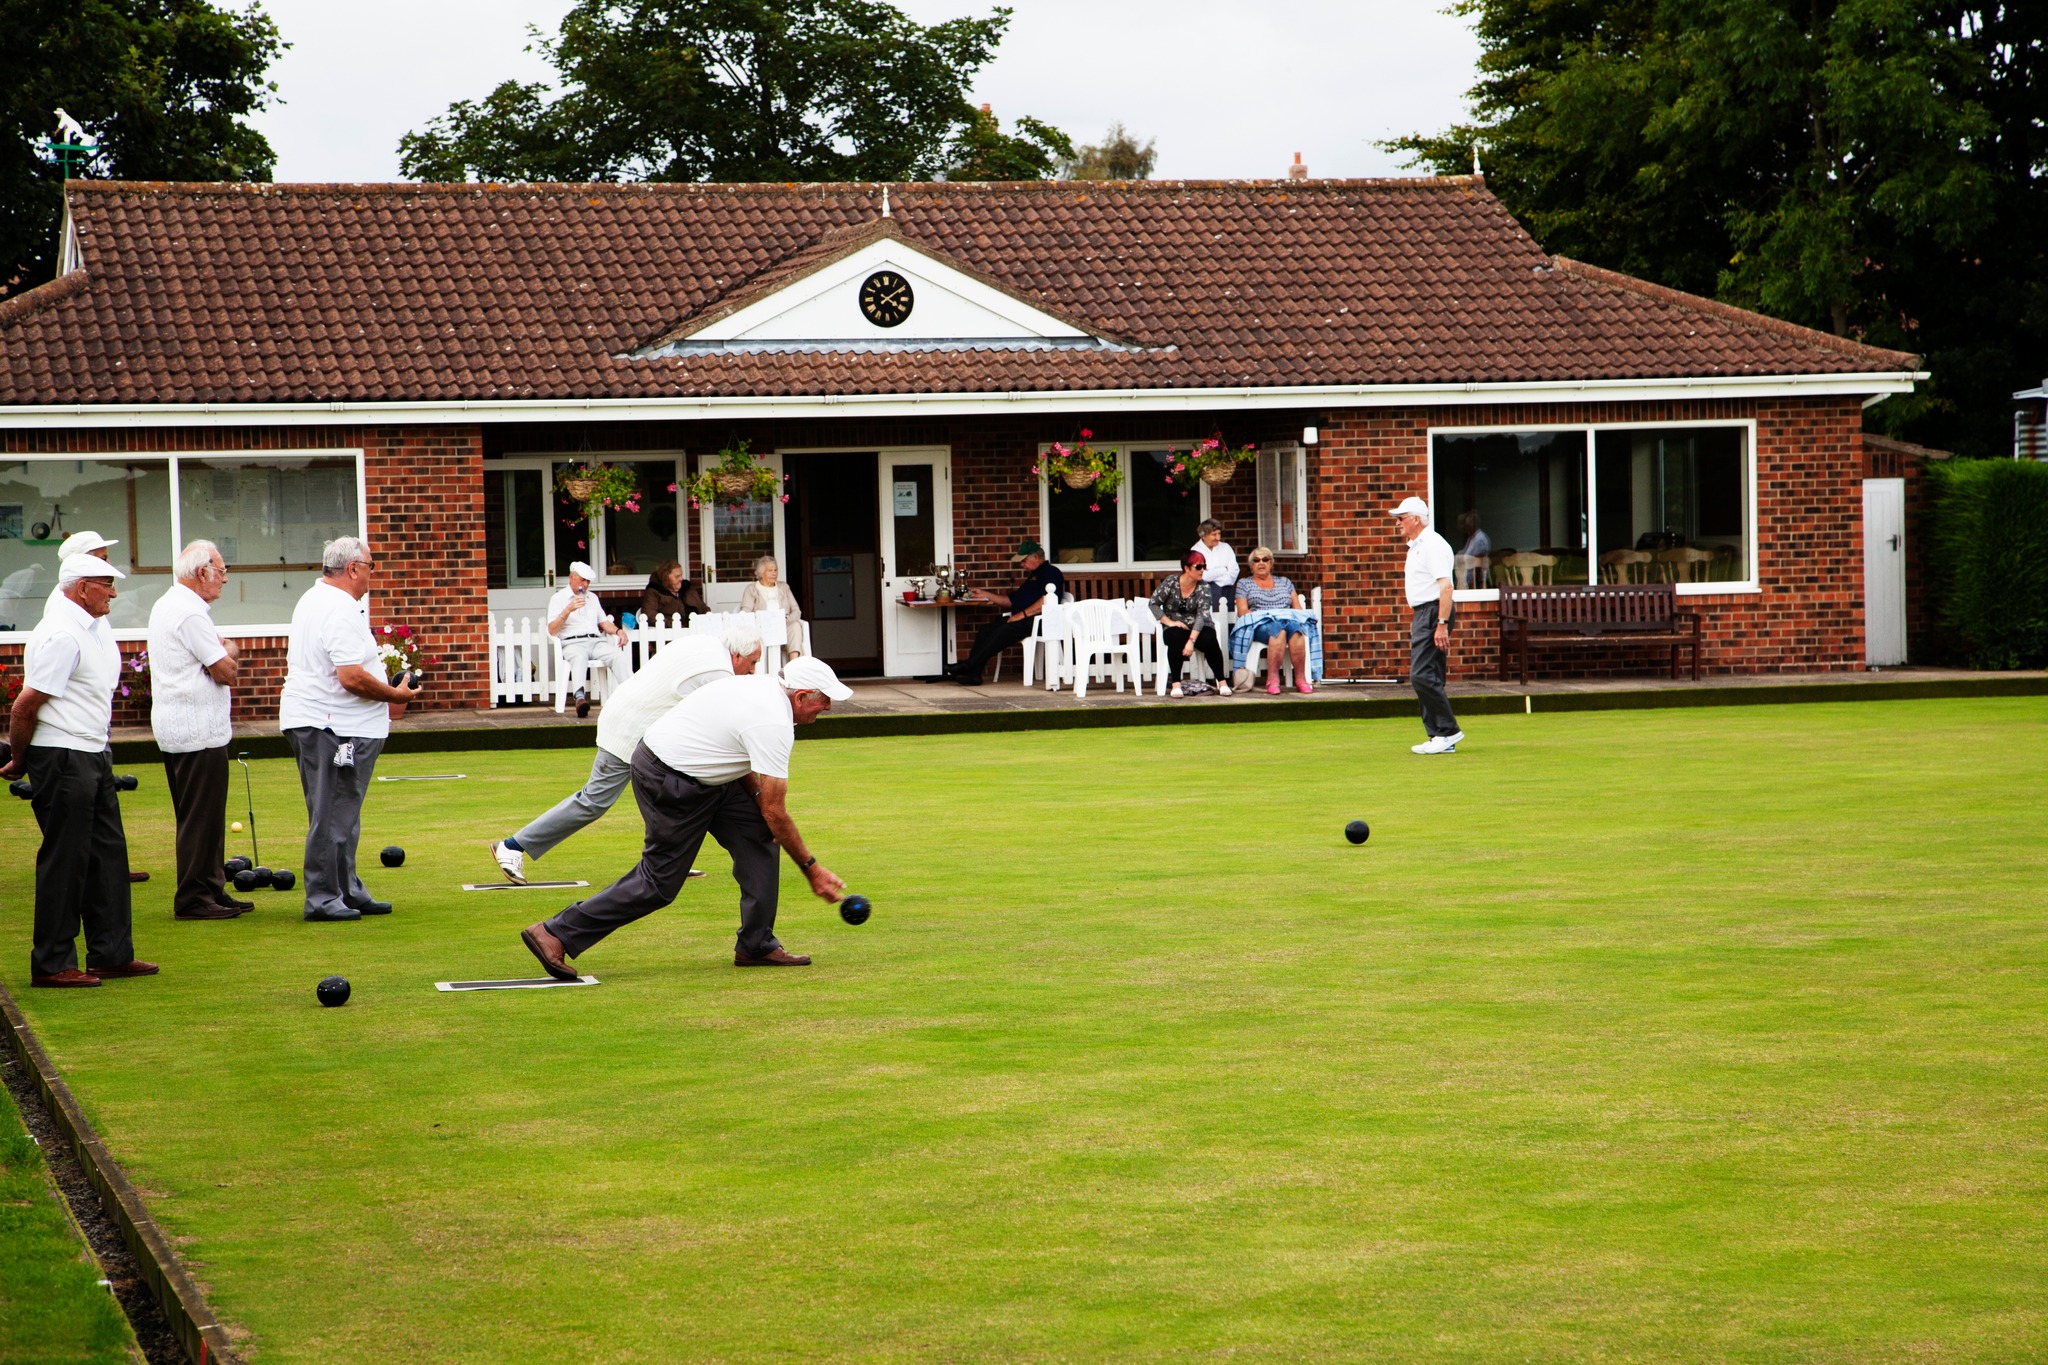 Bowlers with clubhouse in the background.